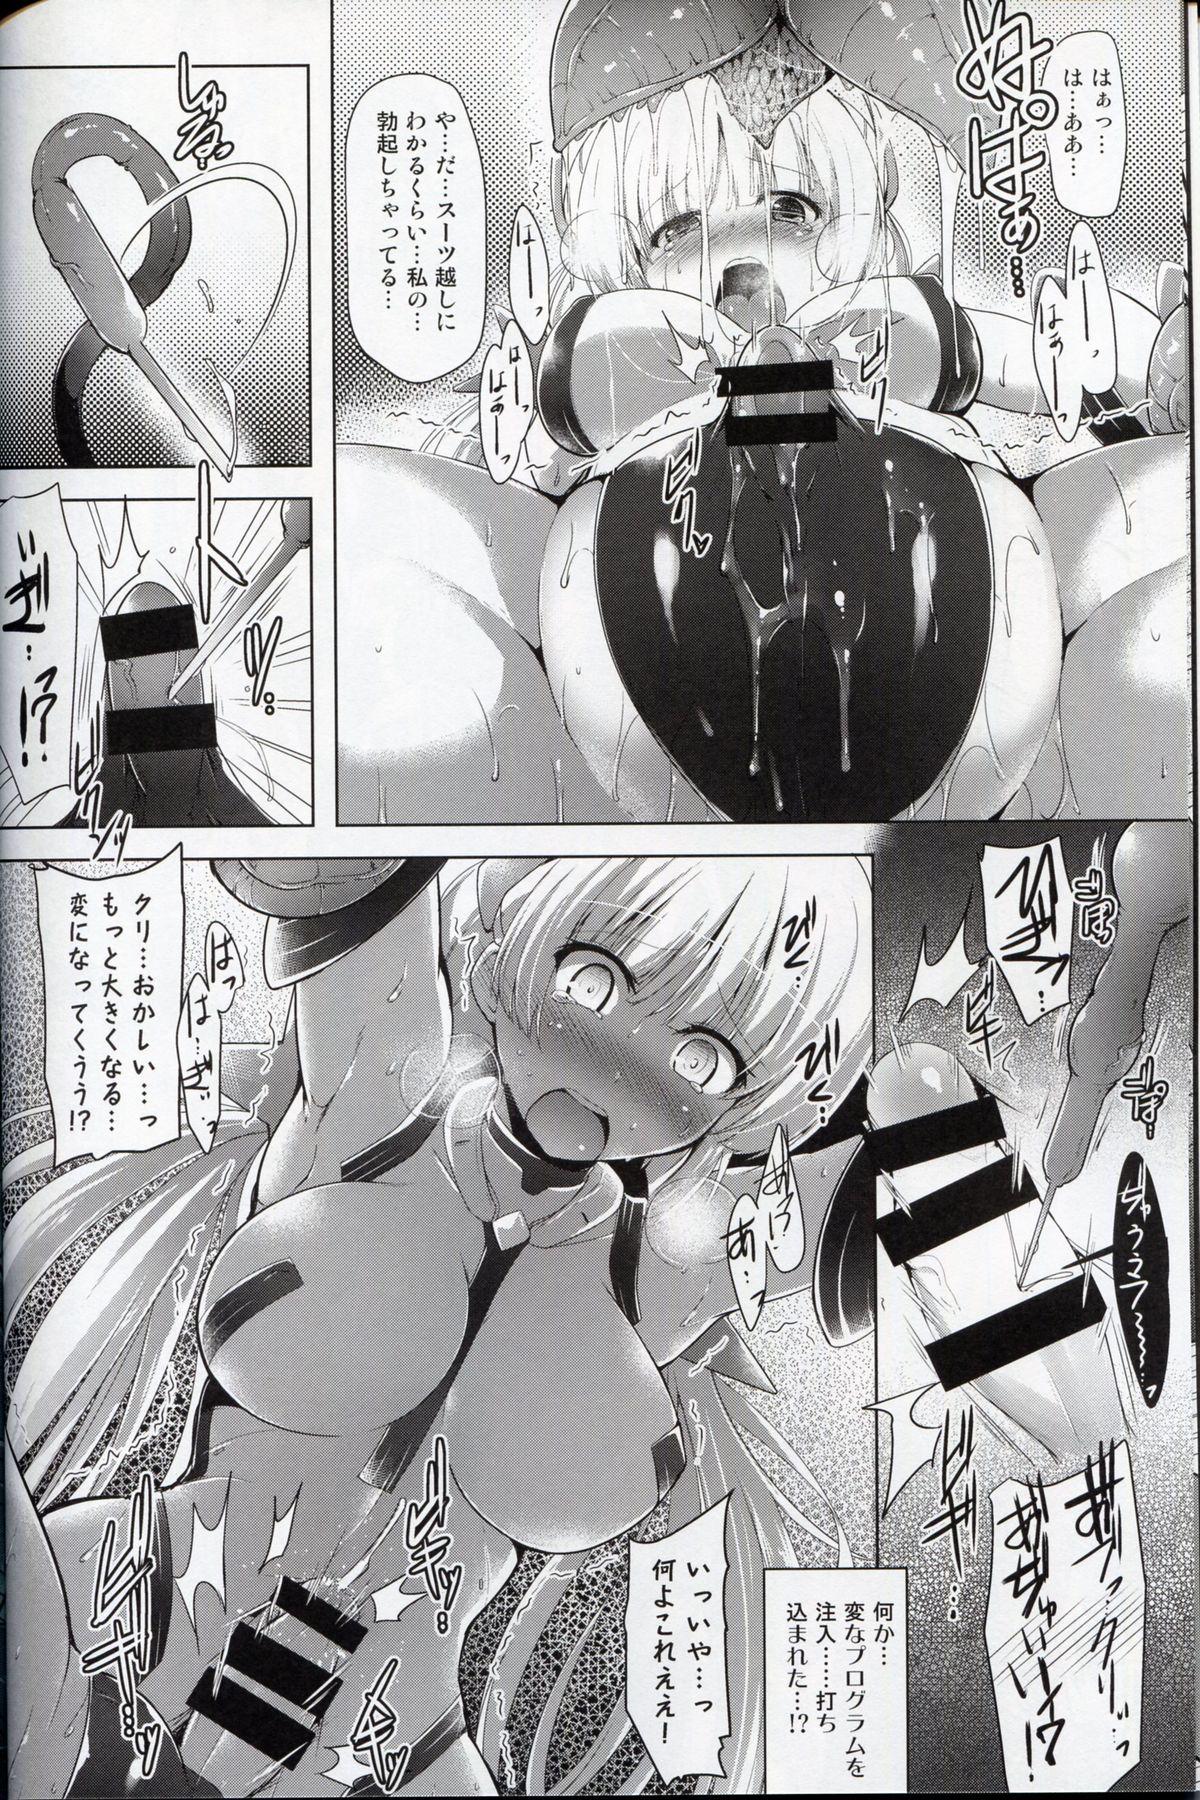 Wank K.231 - Expelled from paradise Women Sucking Dicks - Page 7